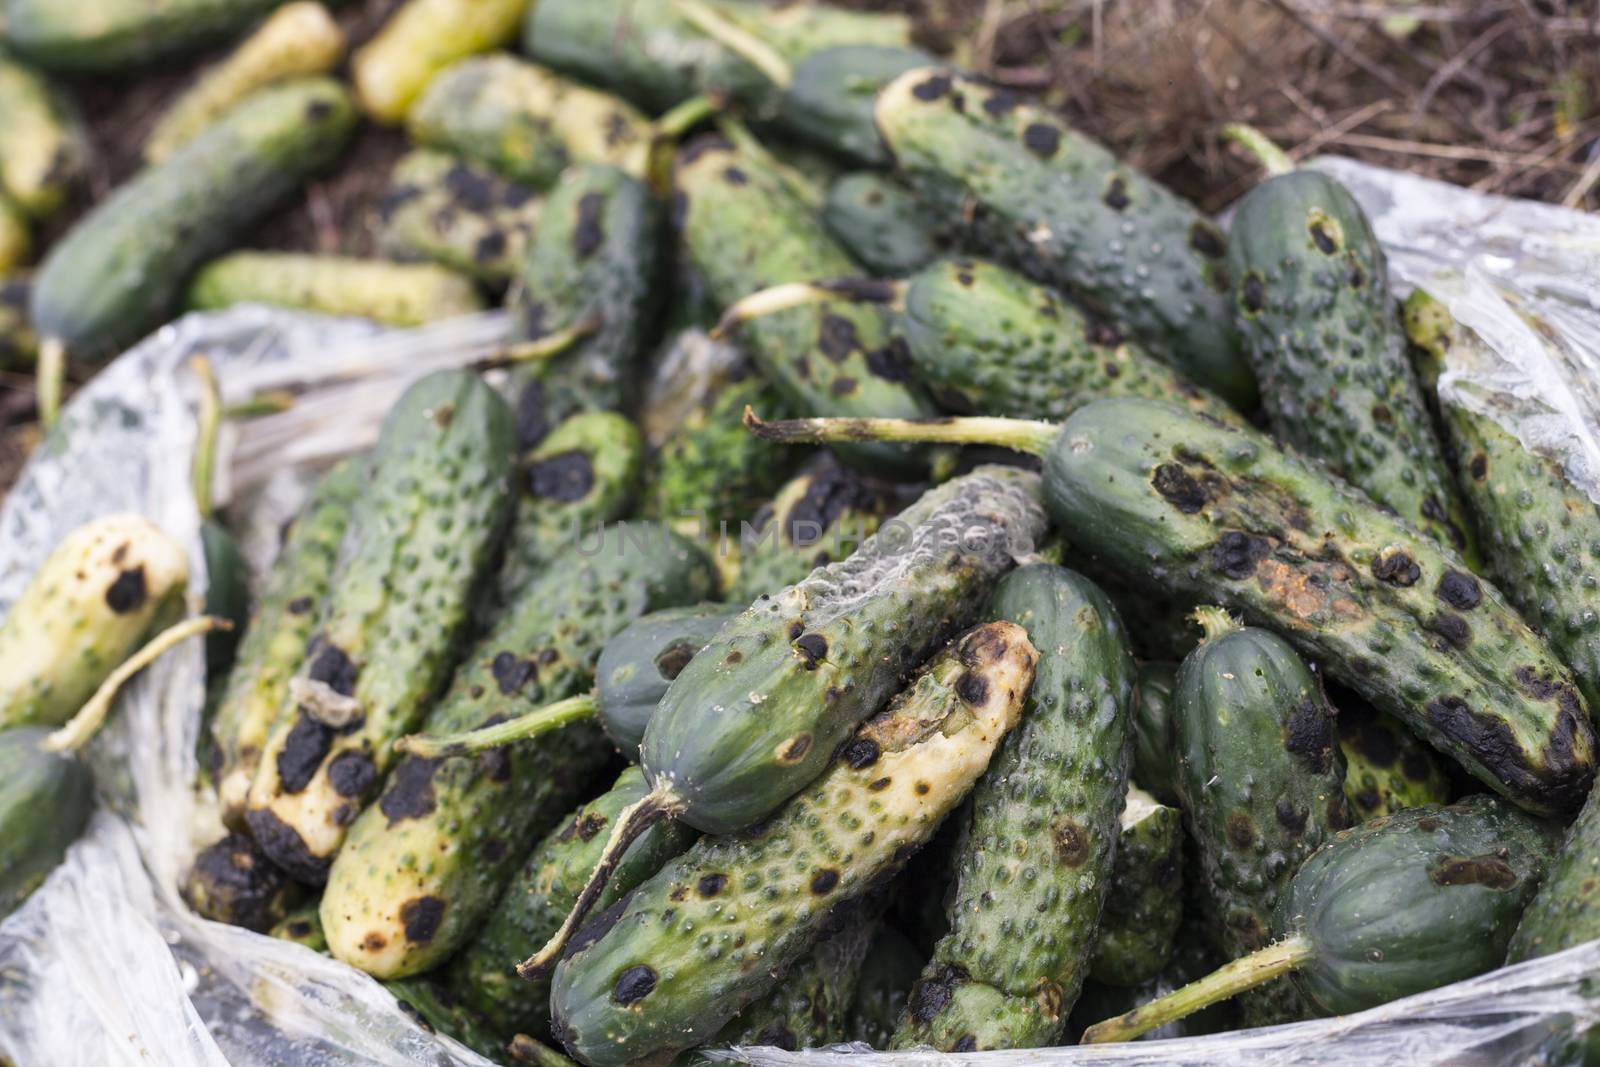 Piles of rotten cucumbers on the landfill. Close up.